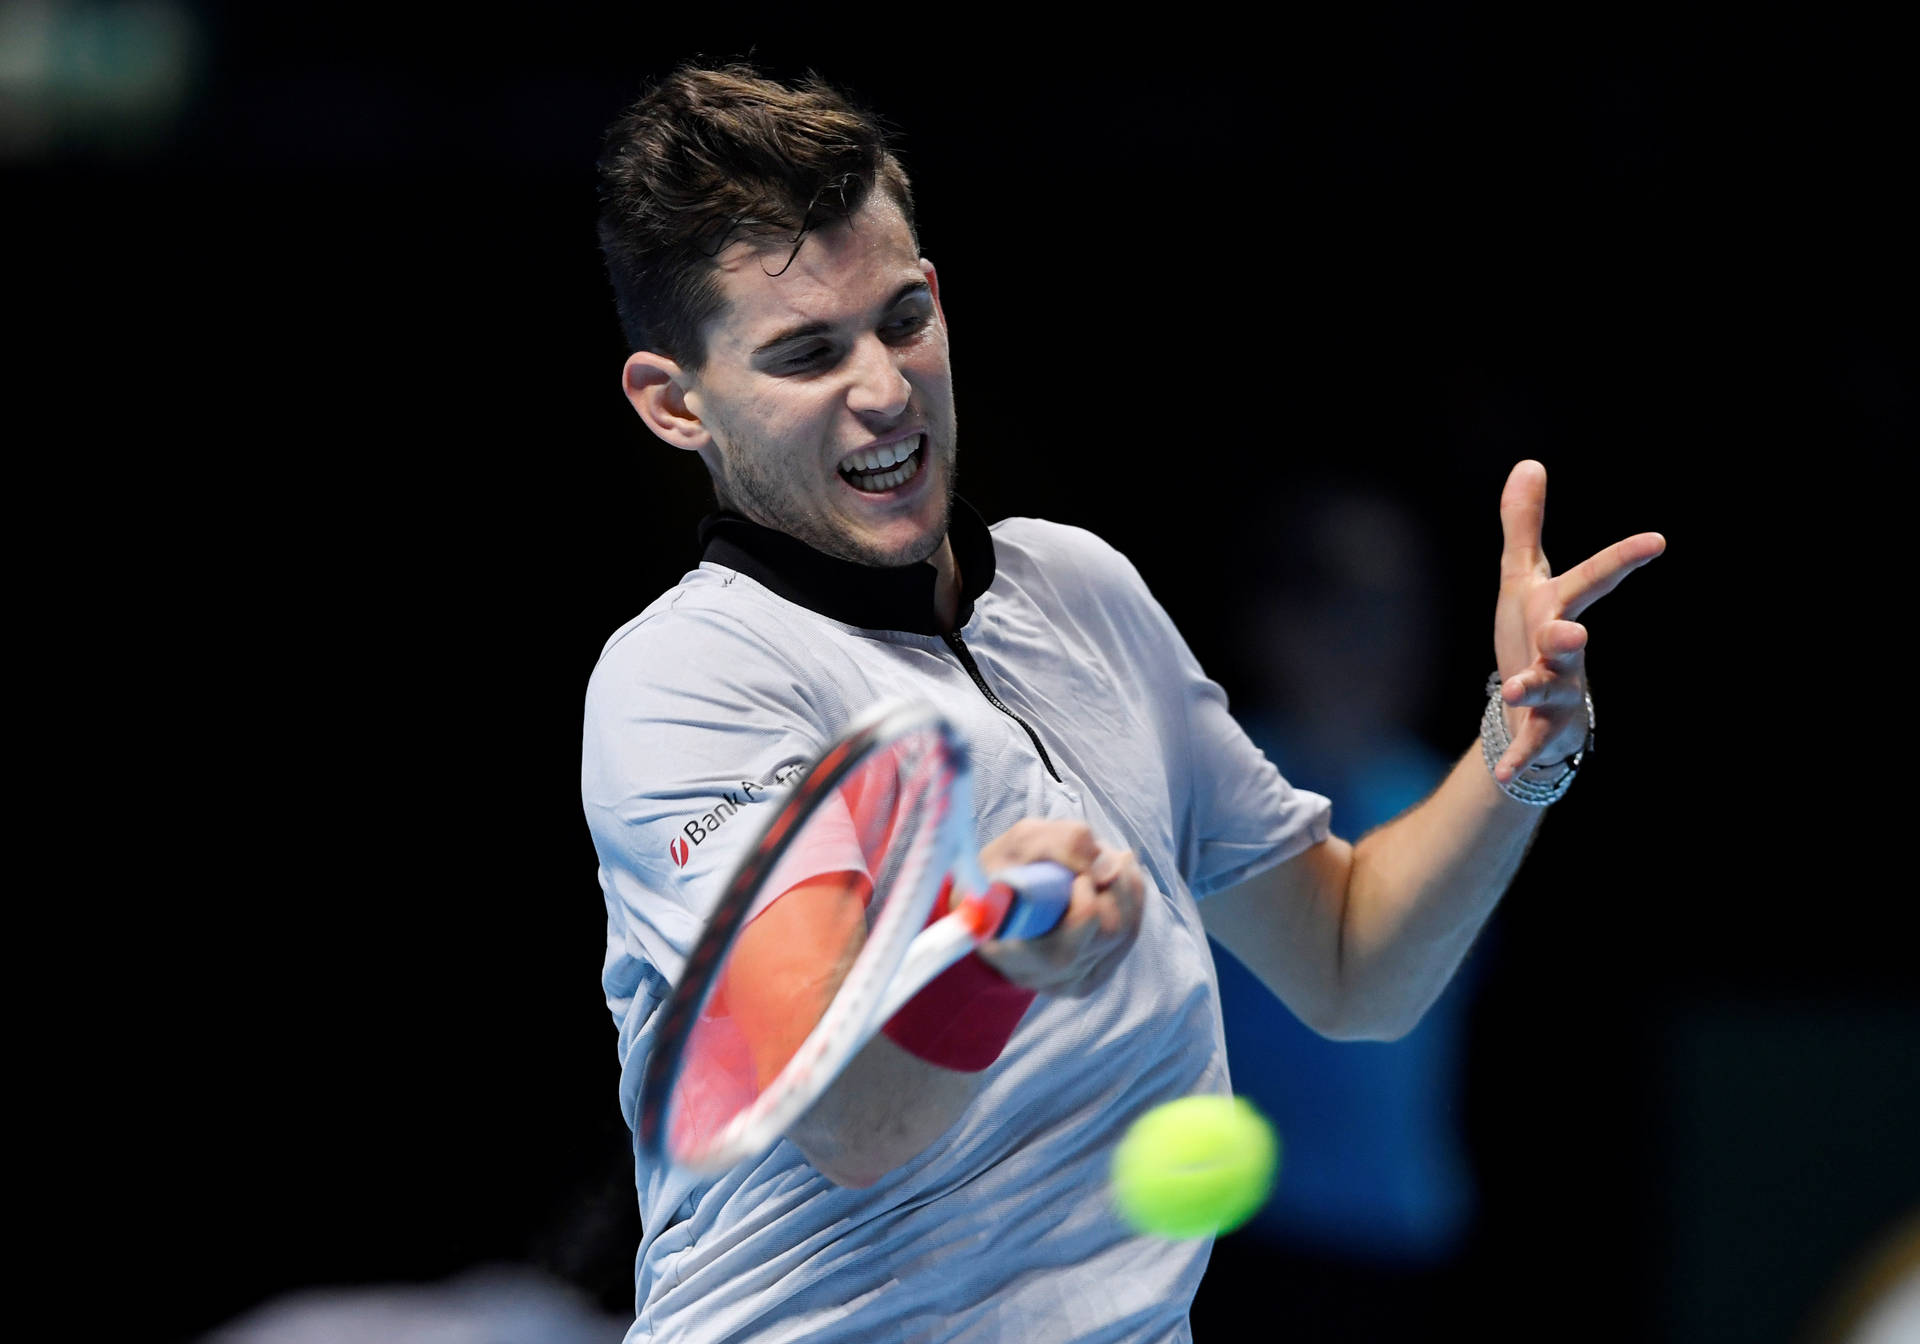 Professional Tennis Player Dominic Thiem In Action